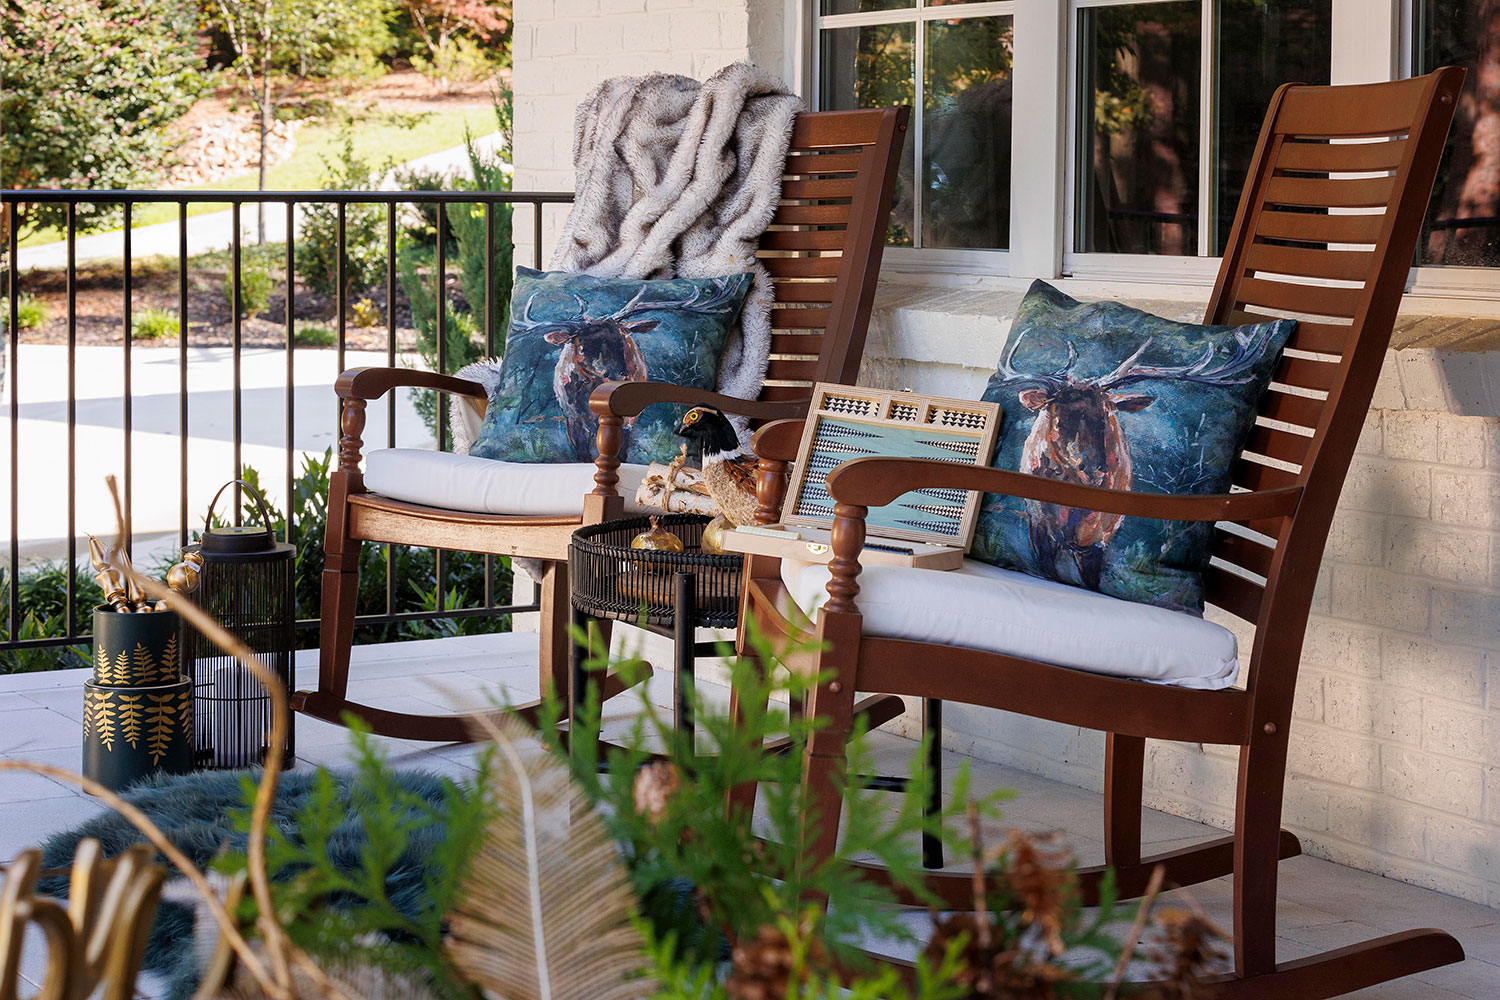 COZY UP WITH AN ENCHANTING PILLOW: Pillows enhance the eye-catching allure of porch décor while also adding cozy vibes. Embrace the forest trend by showcasing deer or other animal motifs on your pillows.